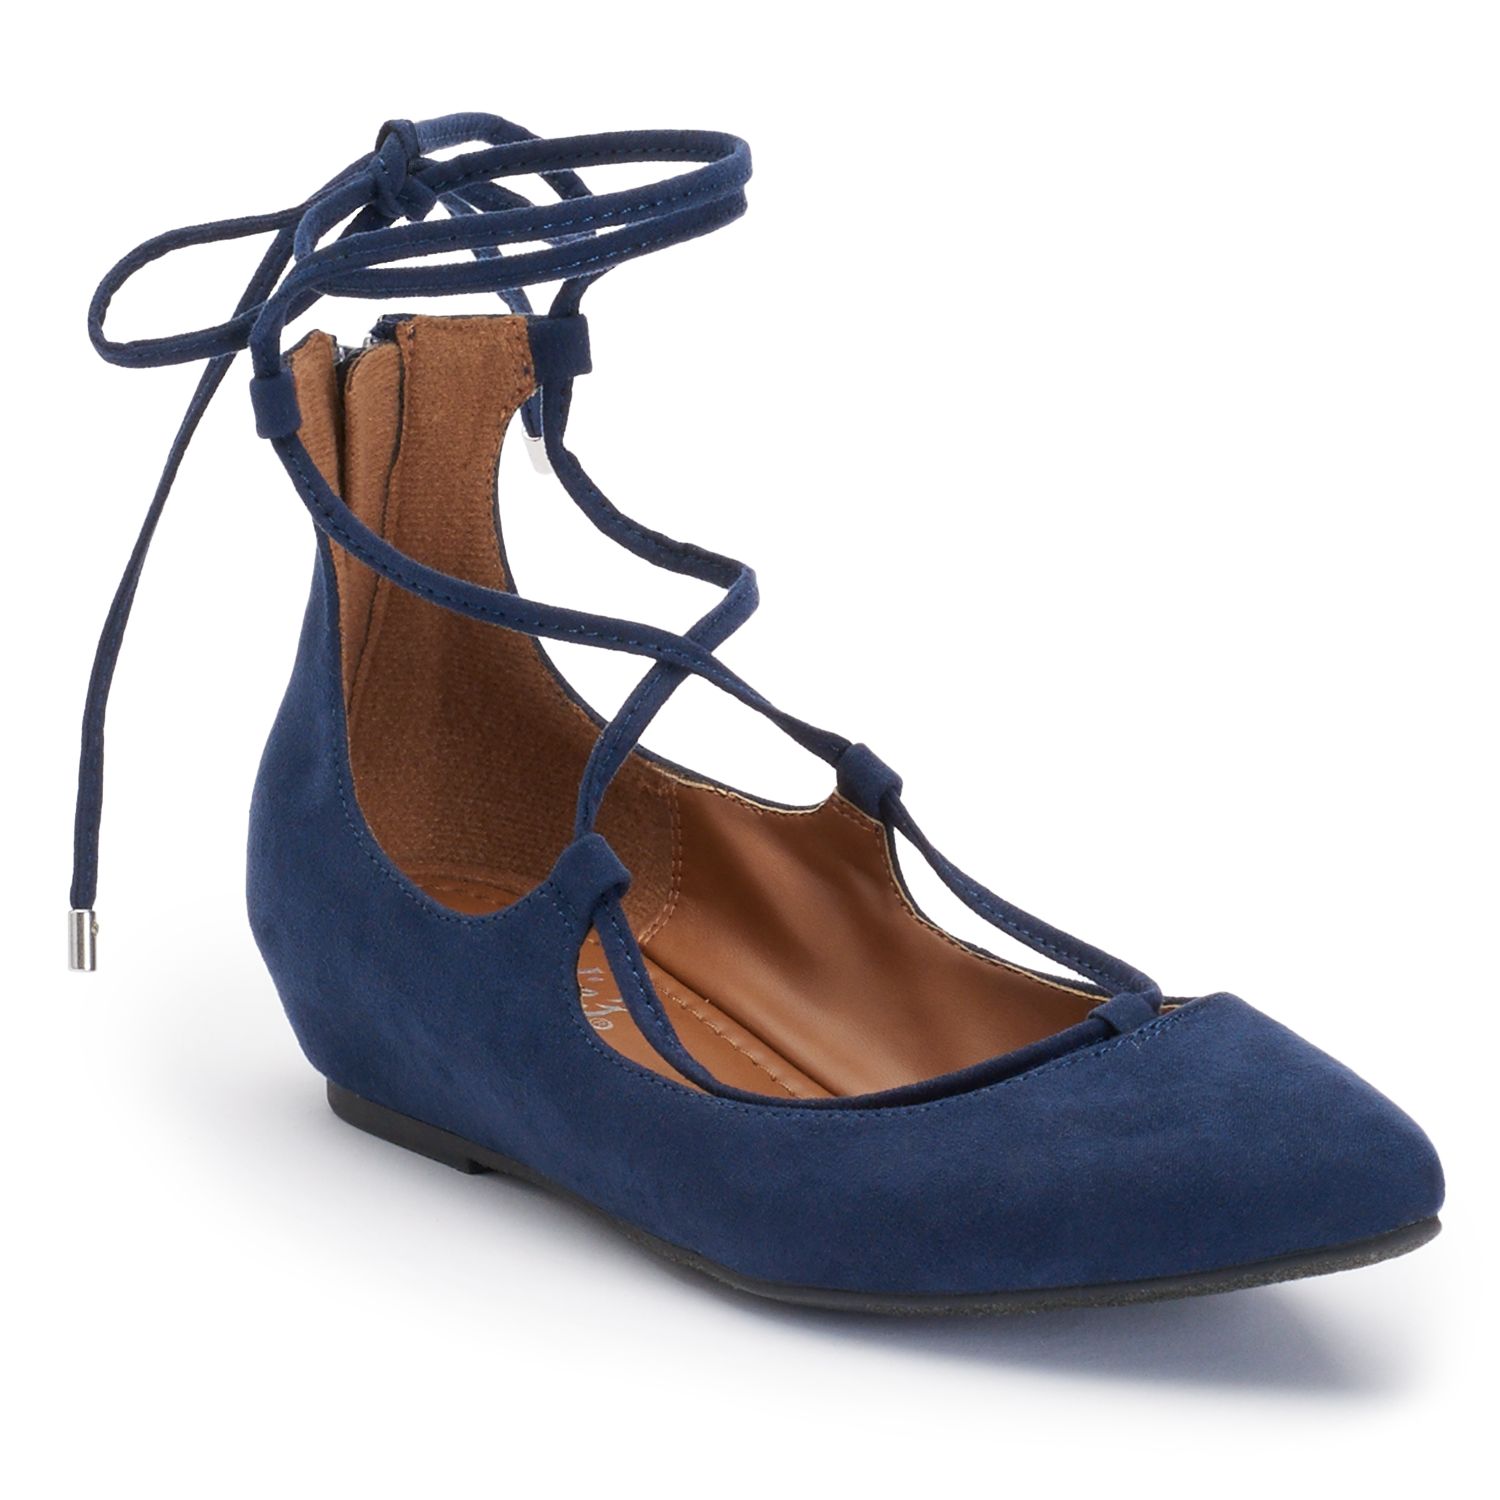 navy blue lace up flats